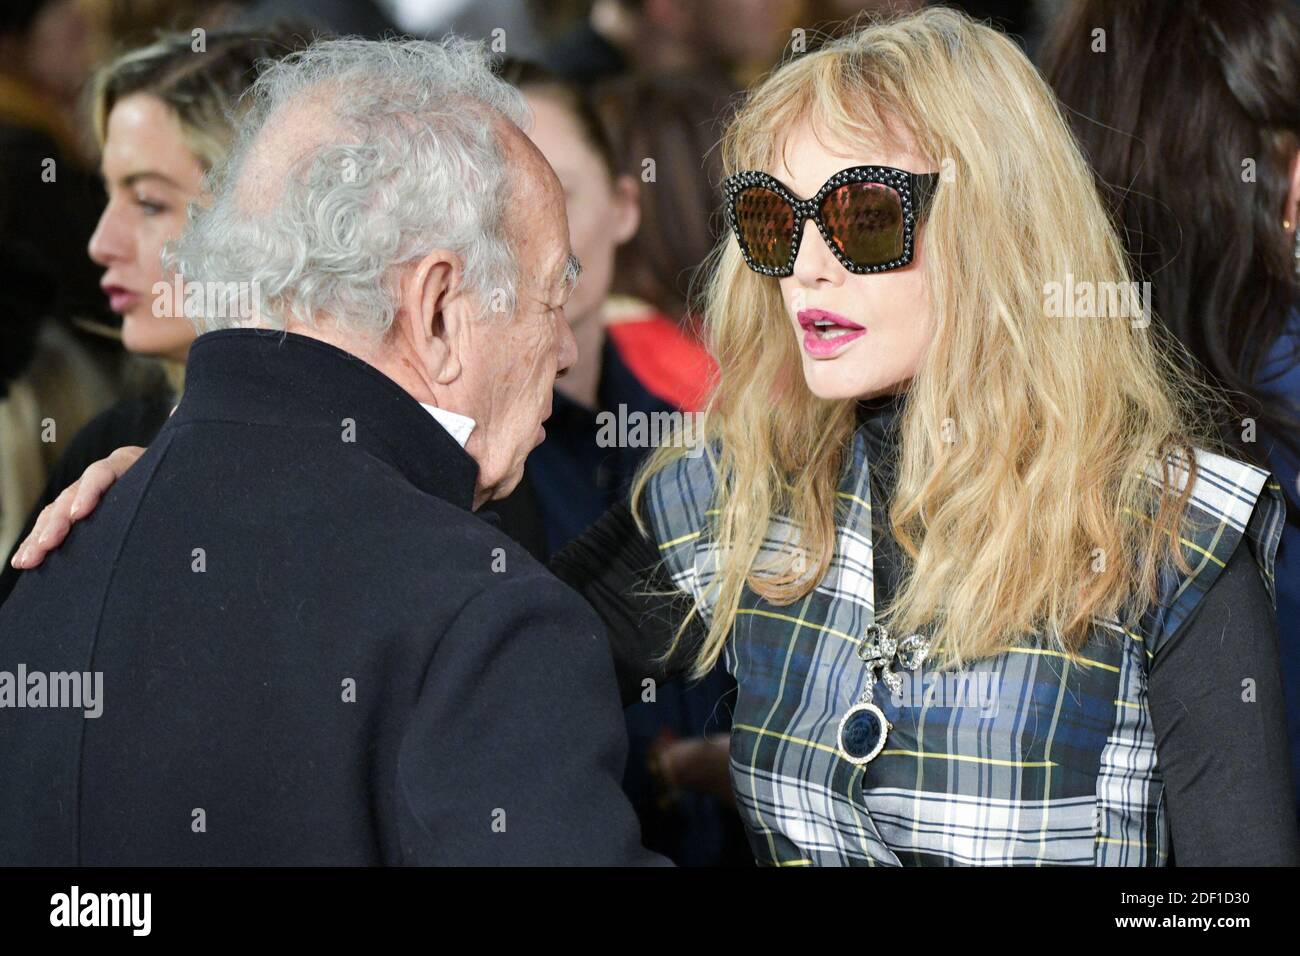 Arielle Dombasle and Gilles Bensimon attending Alexis Mabille Spring ...